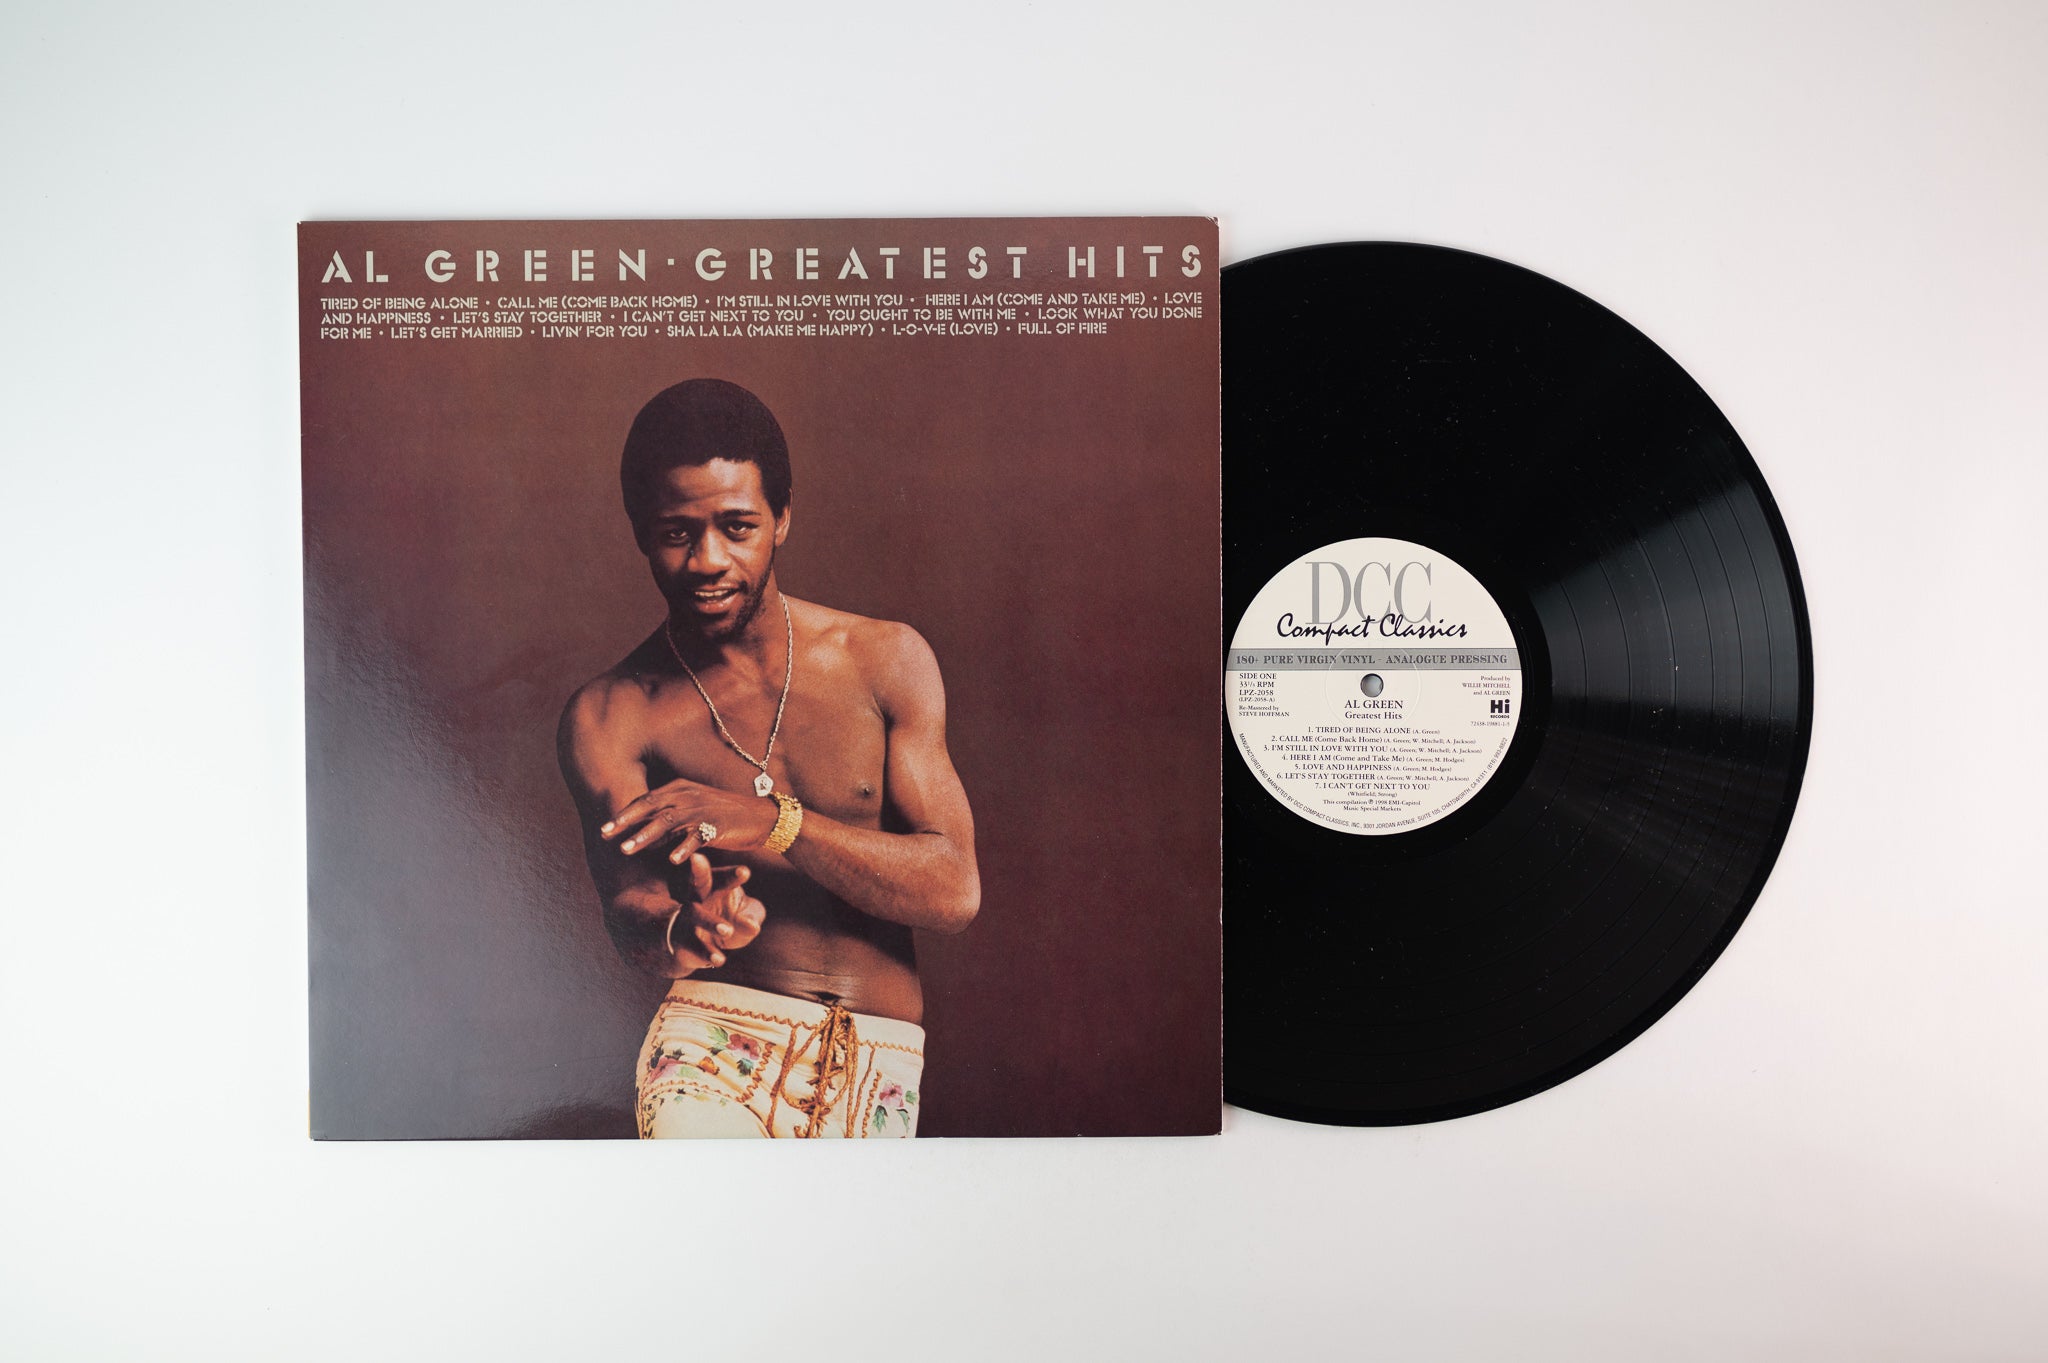 Al Green - Greatest Hits on DCC Compact Classics 180 Gram Limited Edition Numbered Reissue